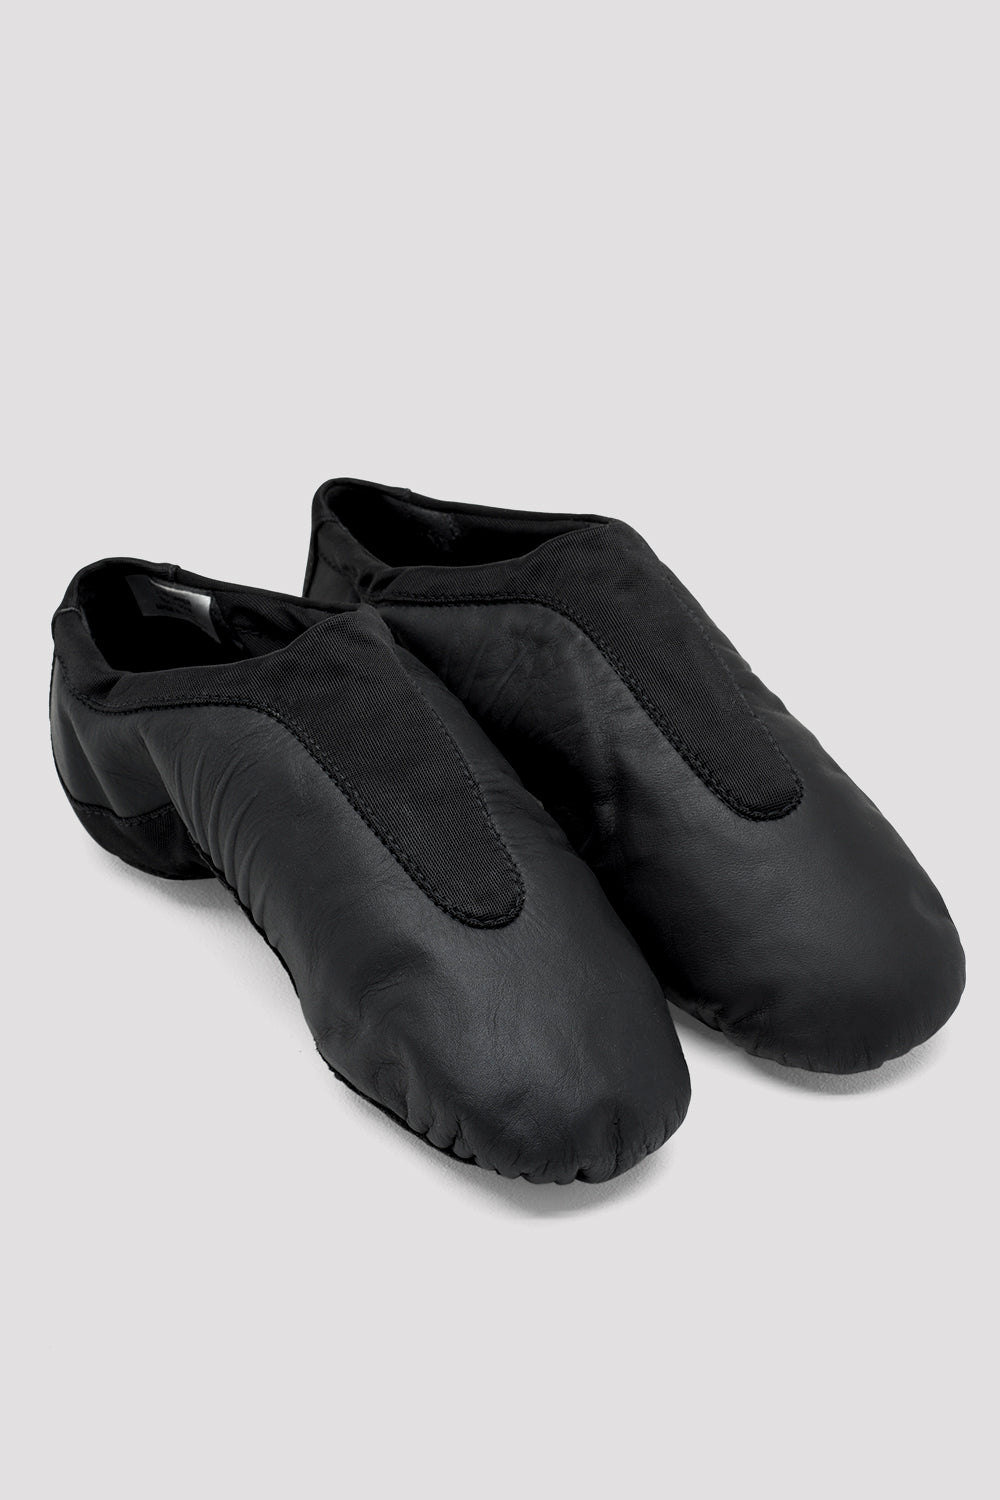 pulse jazz shoes